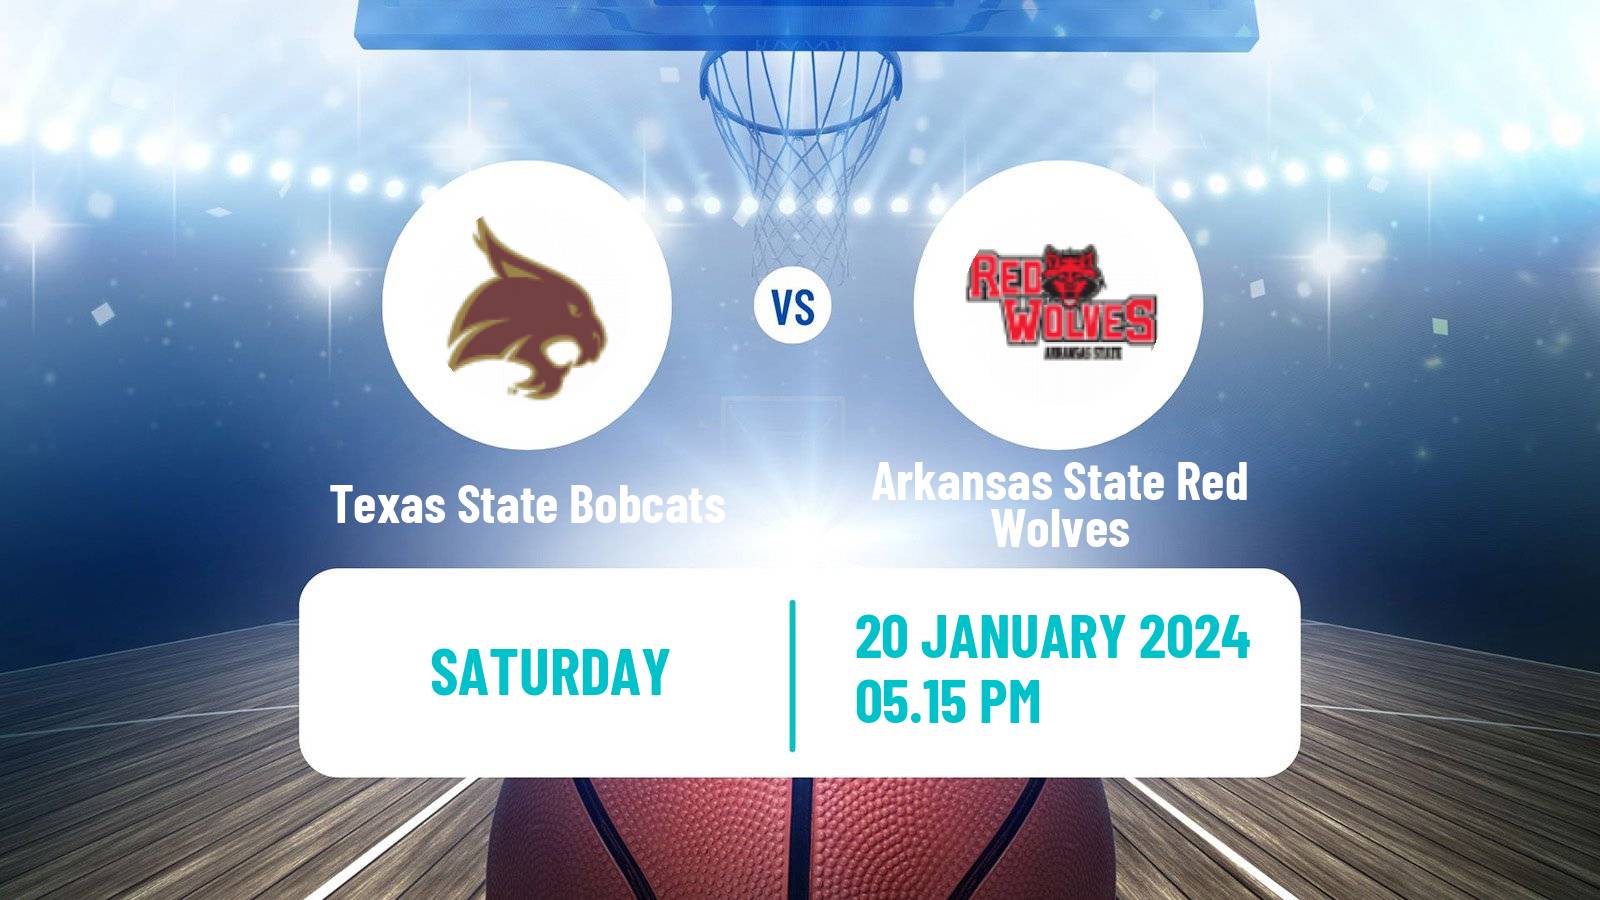 Basketball NCAA College Basketball Texas State Bobcats - Arkansas State Red Wolves